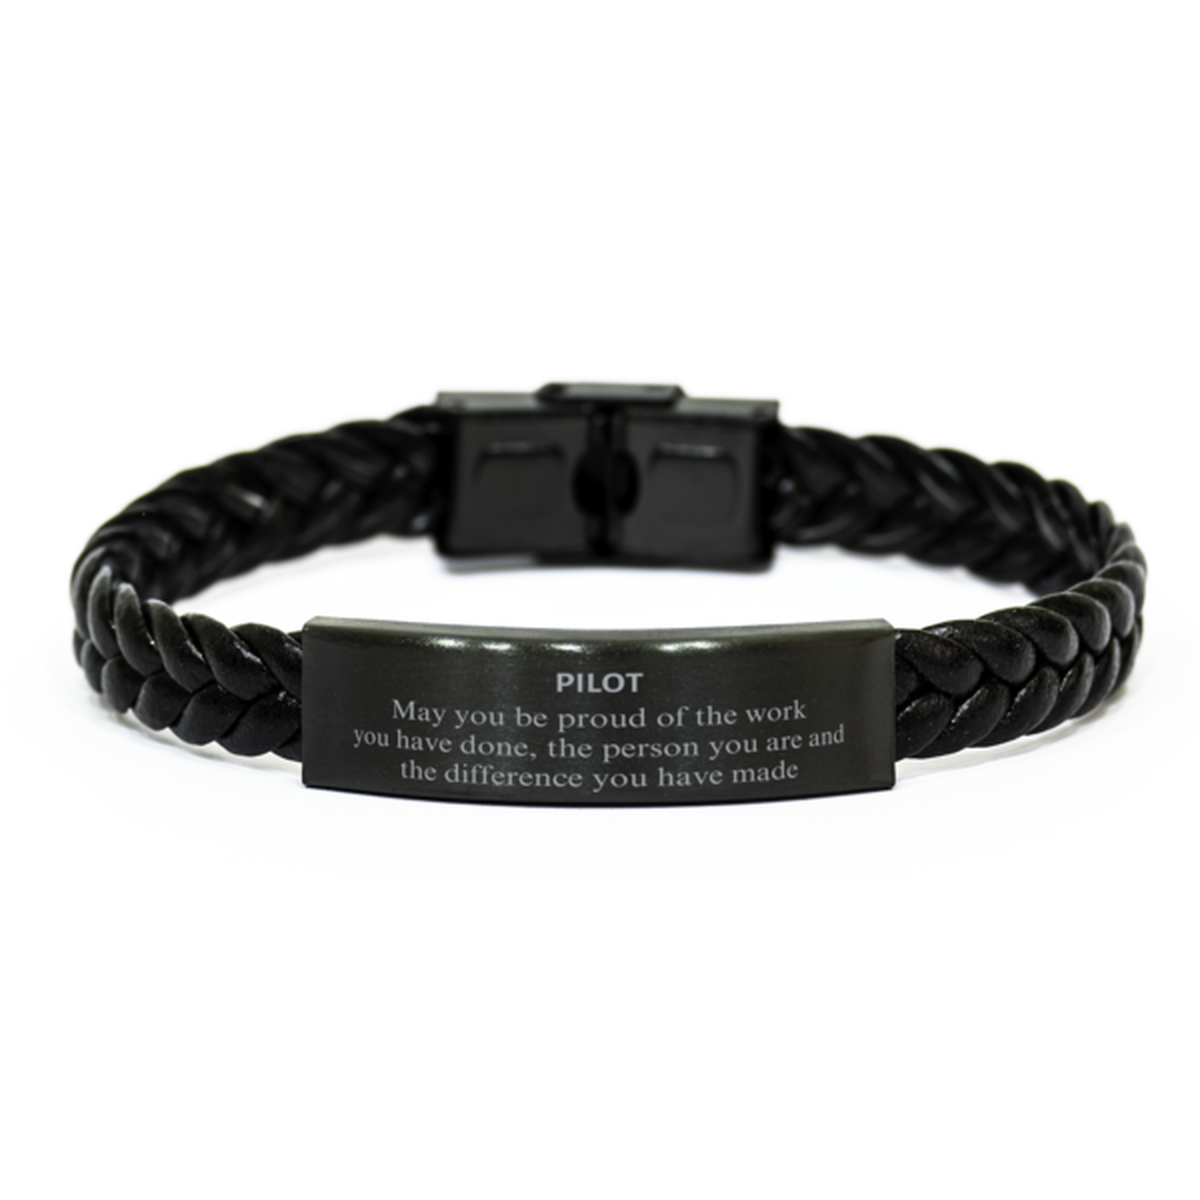 Pilot May you be proud of the work you have done, Retirement Pilot Braided Leather Bracelet for Colleague Appreciation Gifts Amazing for Pilot